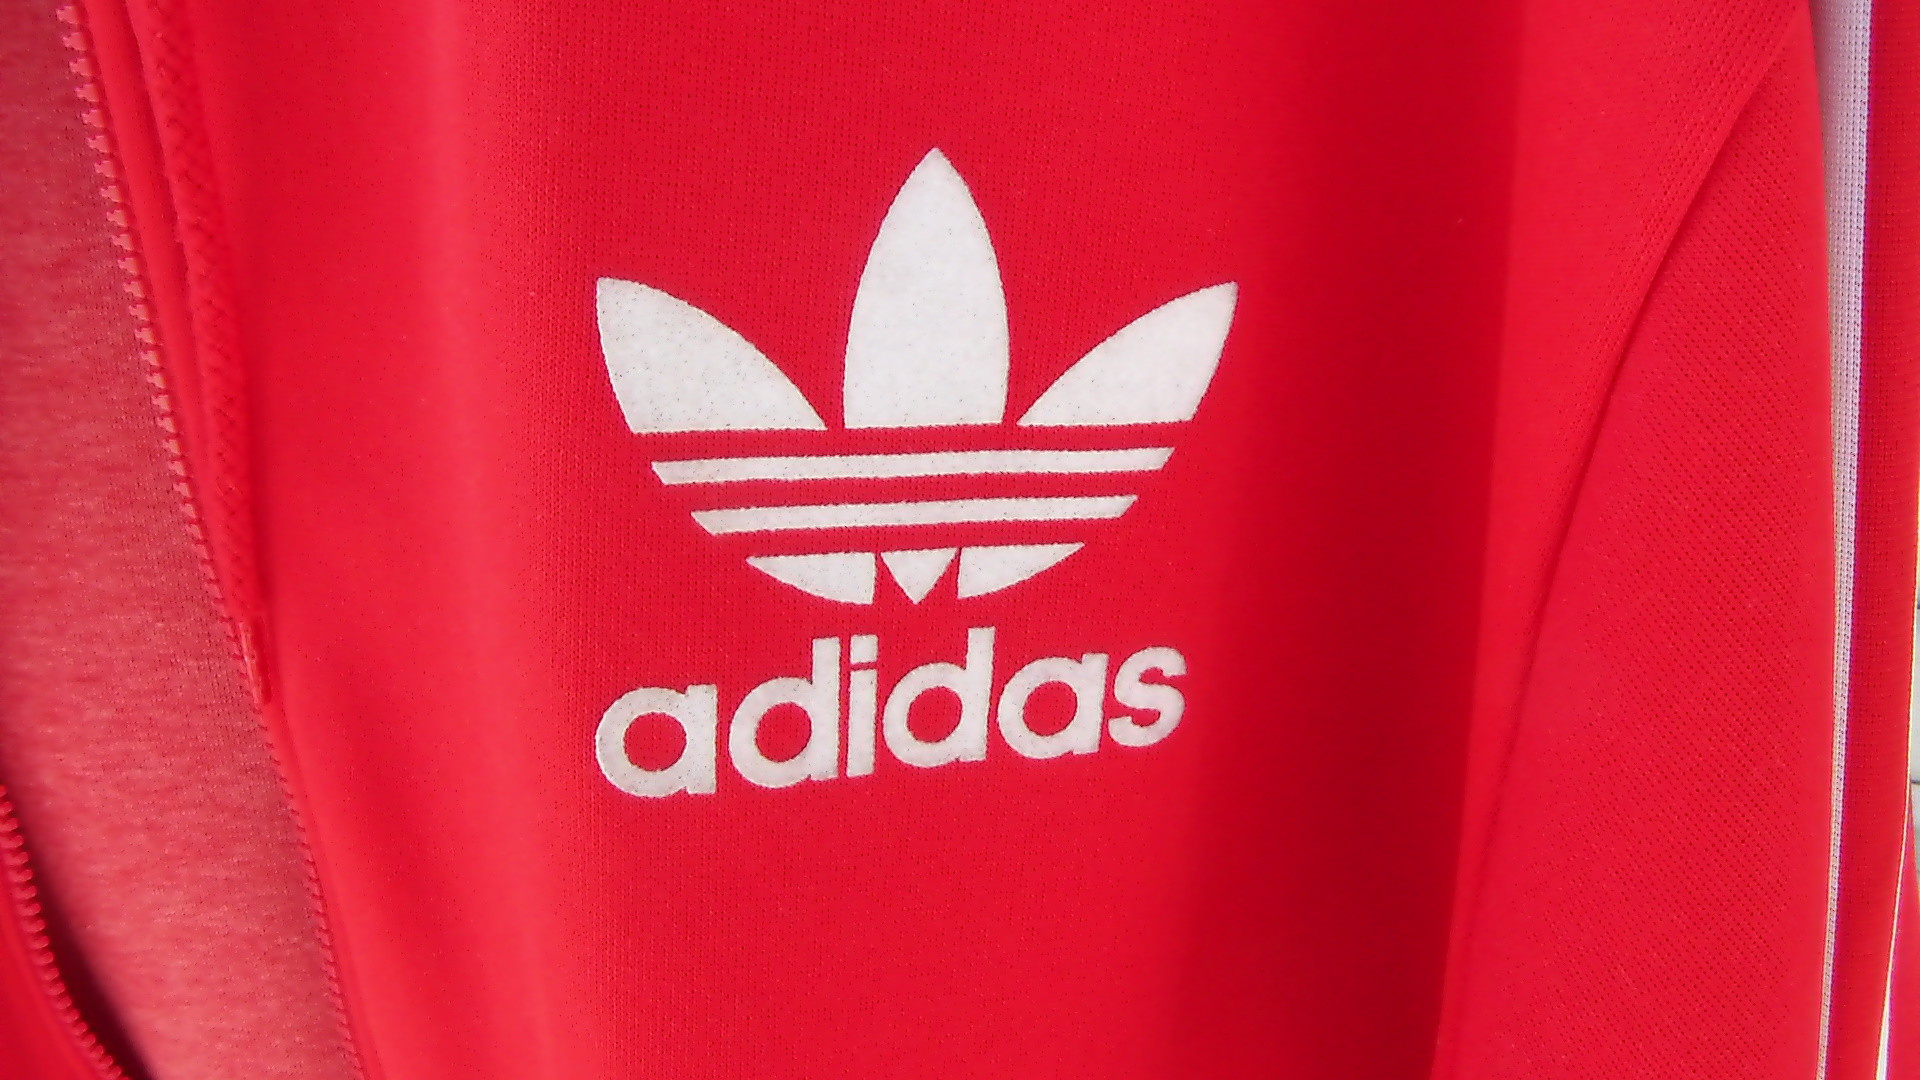 adidas and nike wallpapers, adidas backgrounds